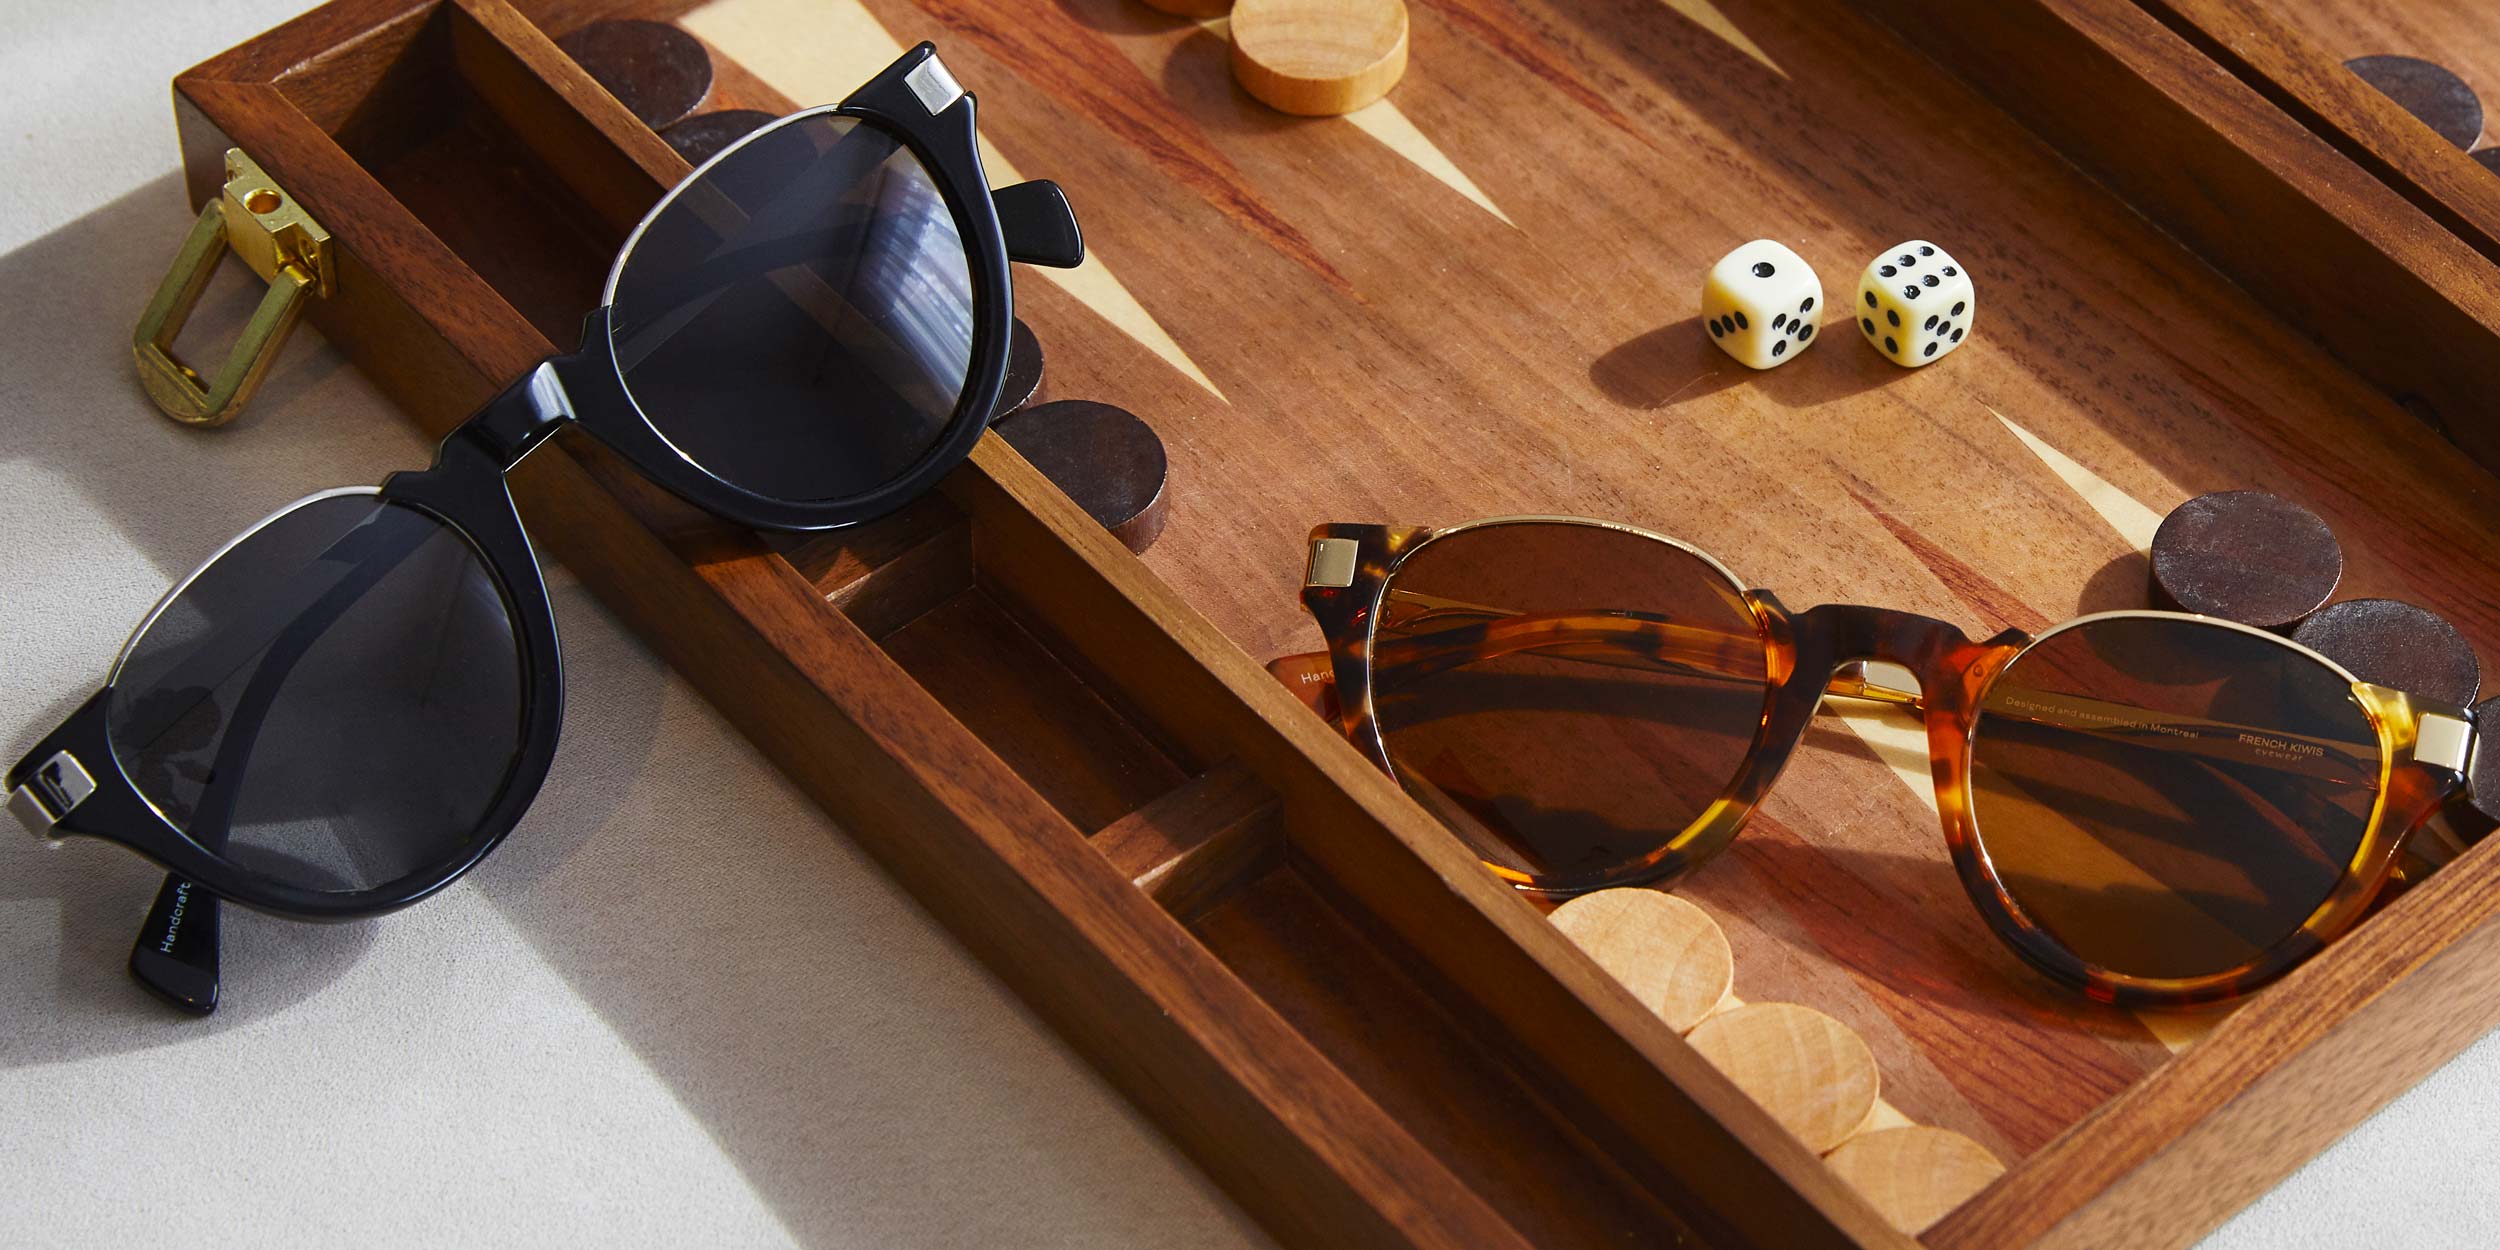 Photo Details of Charlie Sun Black & Silver Sun Glasses in a room